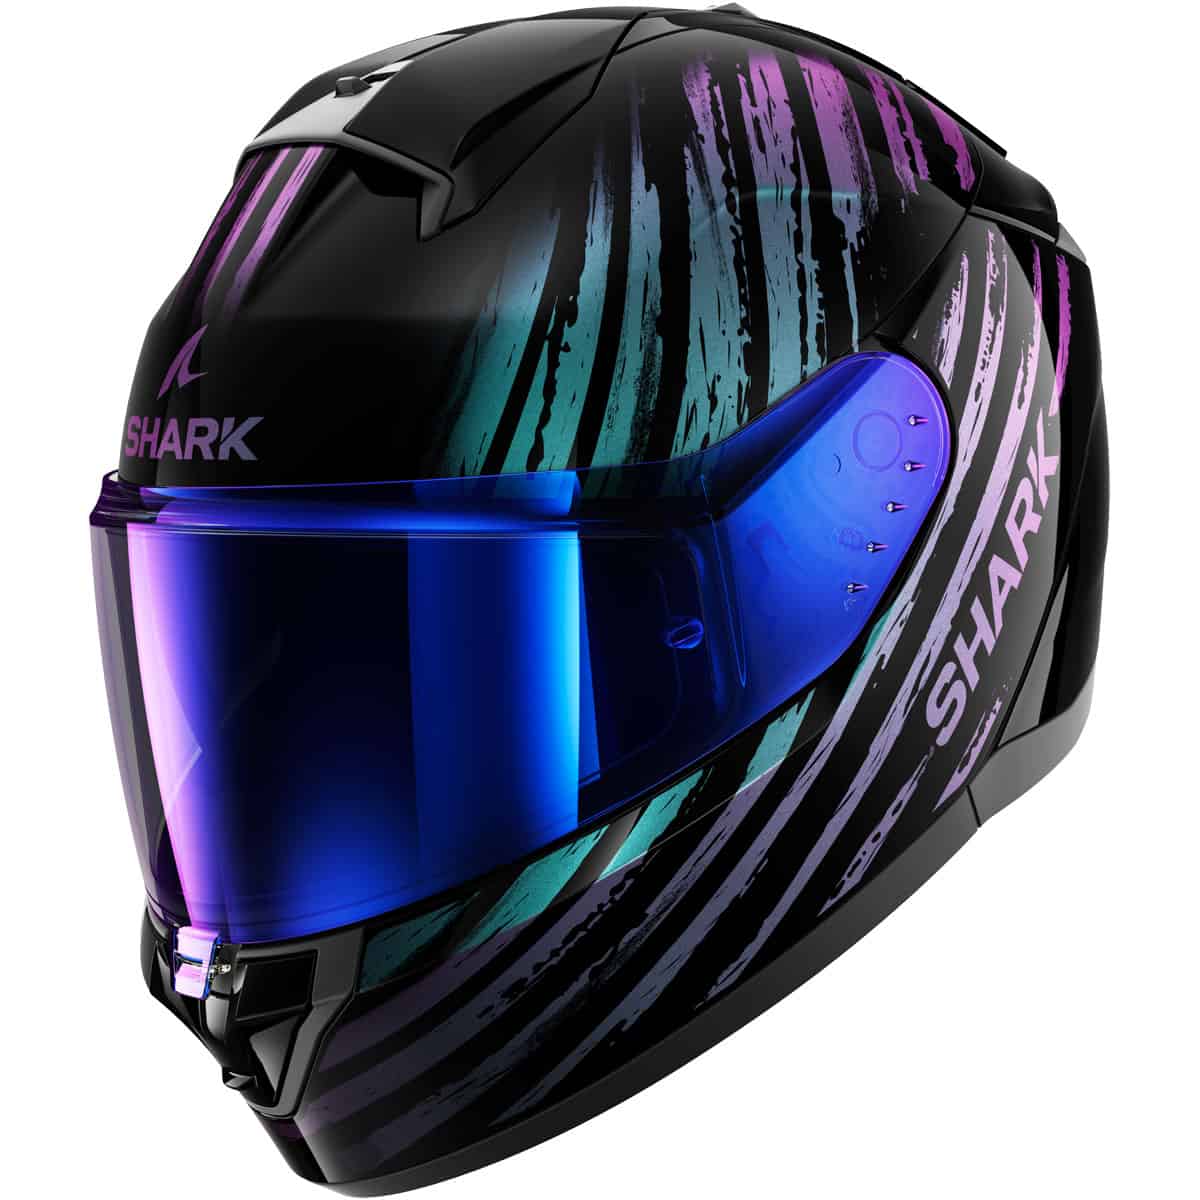 The Shark Ridill 2 is the best of both worlds: a stylish streetwear helmet with advanced safety features